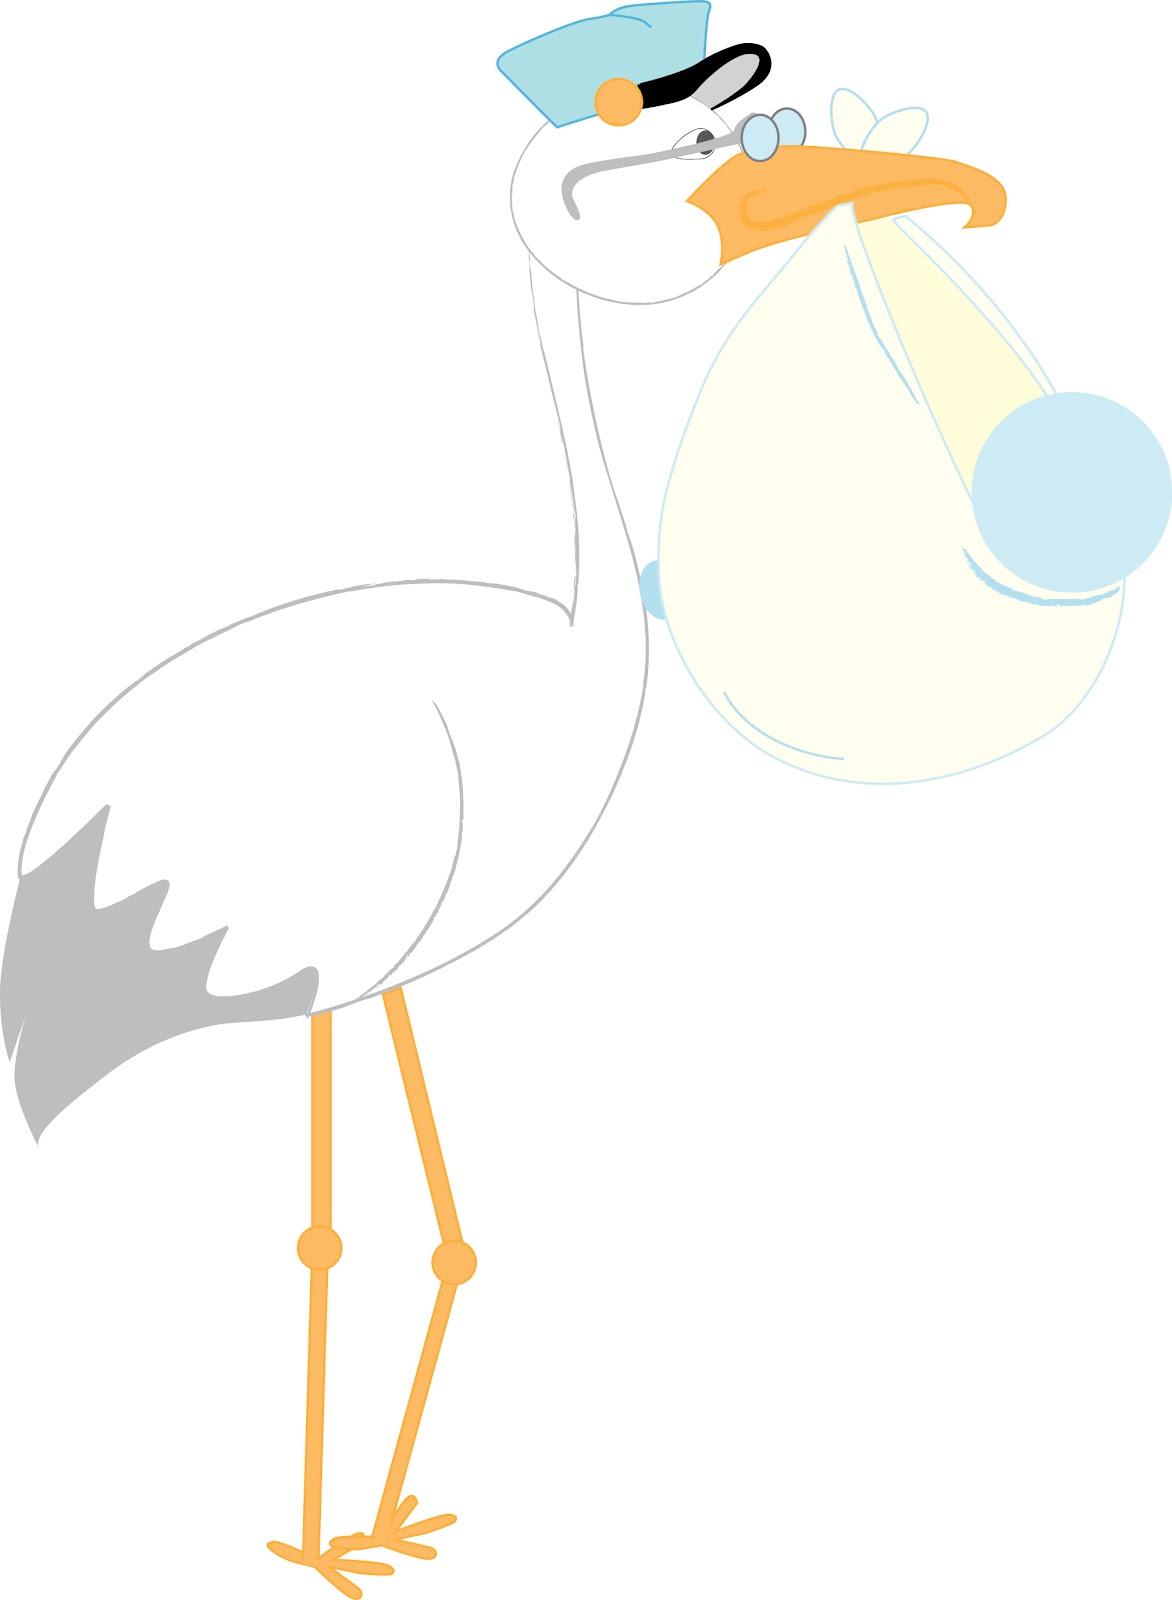 Stork And Baby Images | Free Download Clip Art | Free Clip Art ...